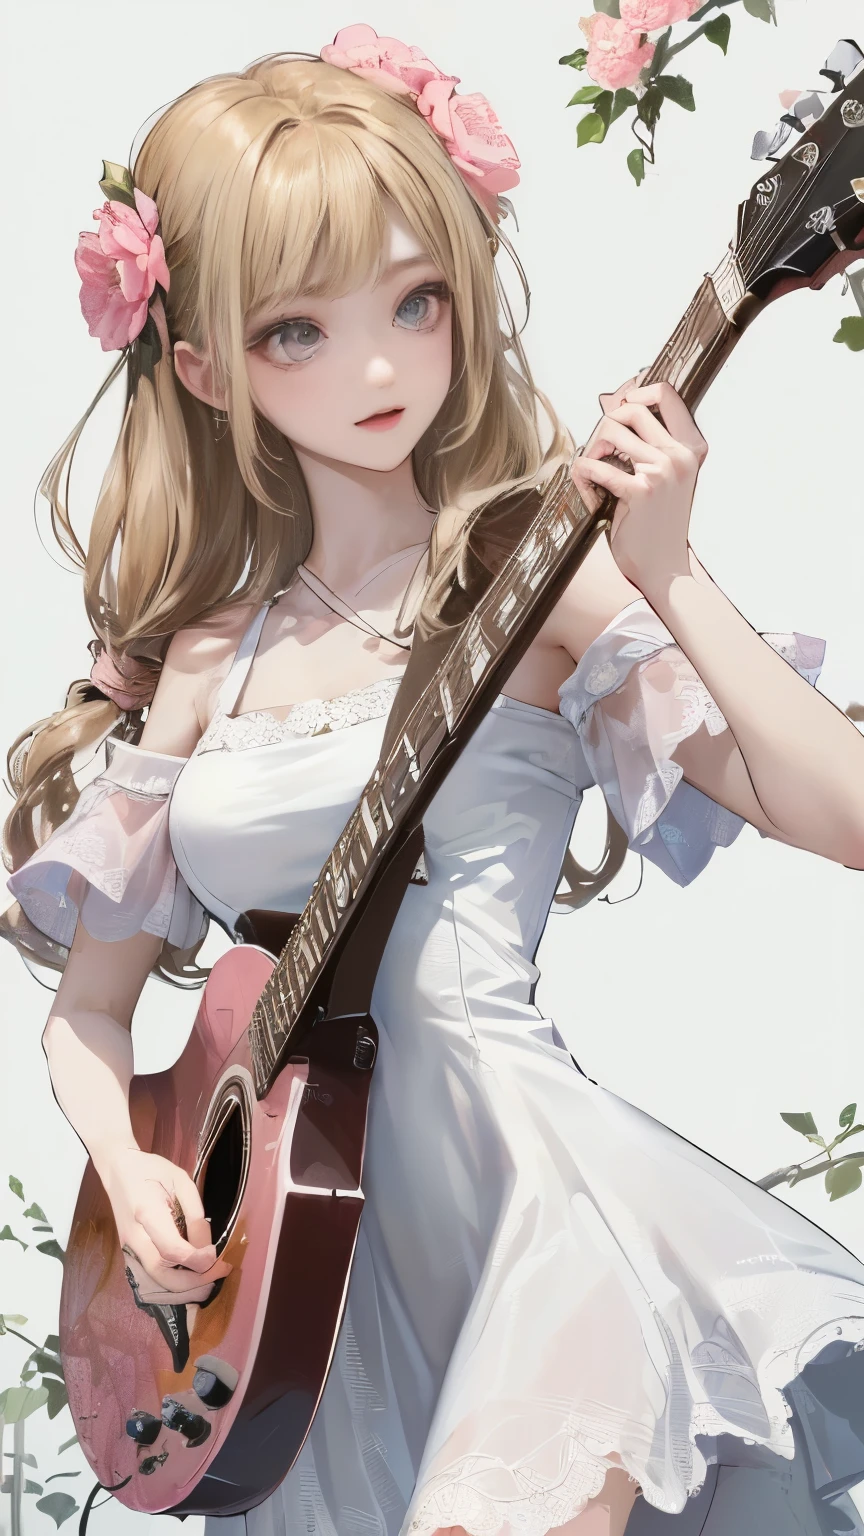 (((Pure white wall background)))、(((Best image quality、8K、Beautiful woman、White wall background)))、guitarist、play the guitar、(((Woman with long hair、Blonde、Girly Hairstyles)))Calm expression、Laughter、(((Botanical pattern dress、White and pink dress、)))Stylish imagery(((I'm wearing a floral dress)))、Background is nothing